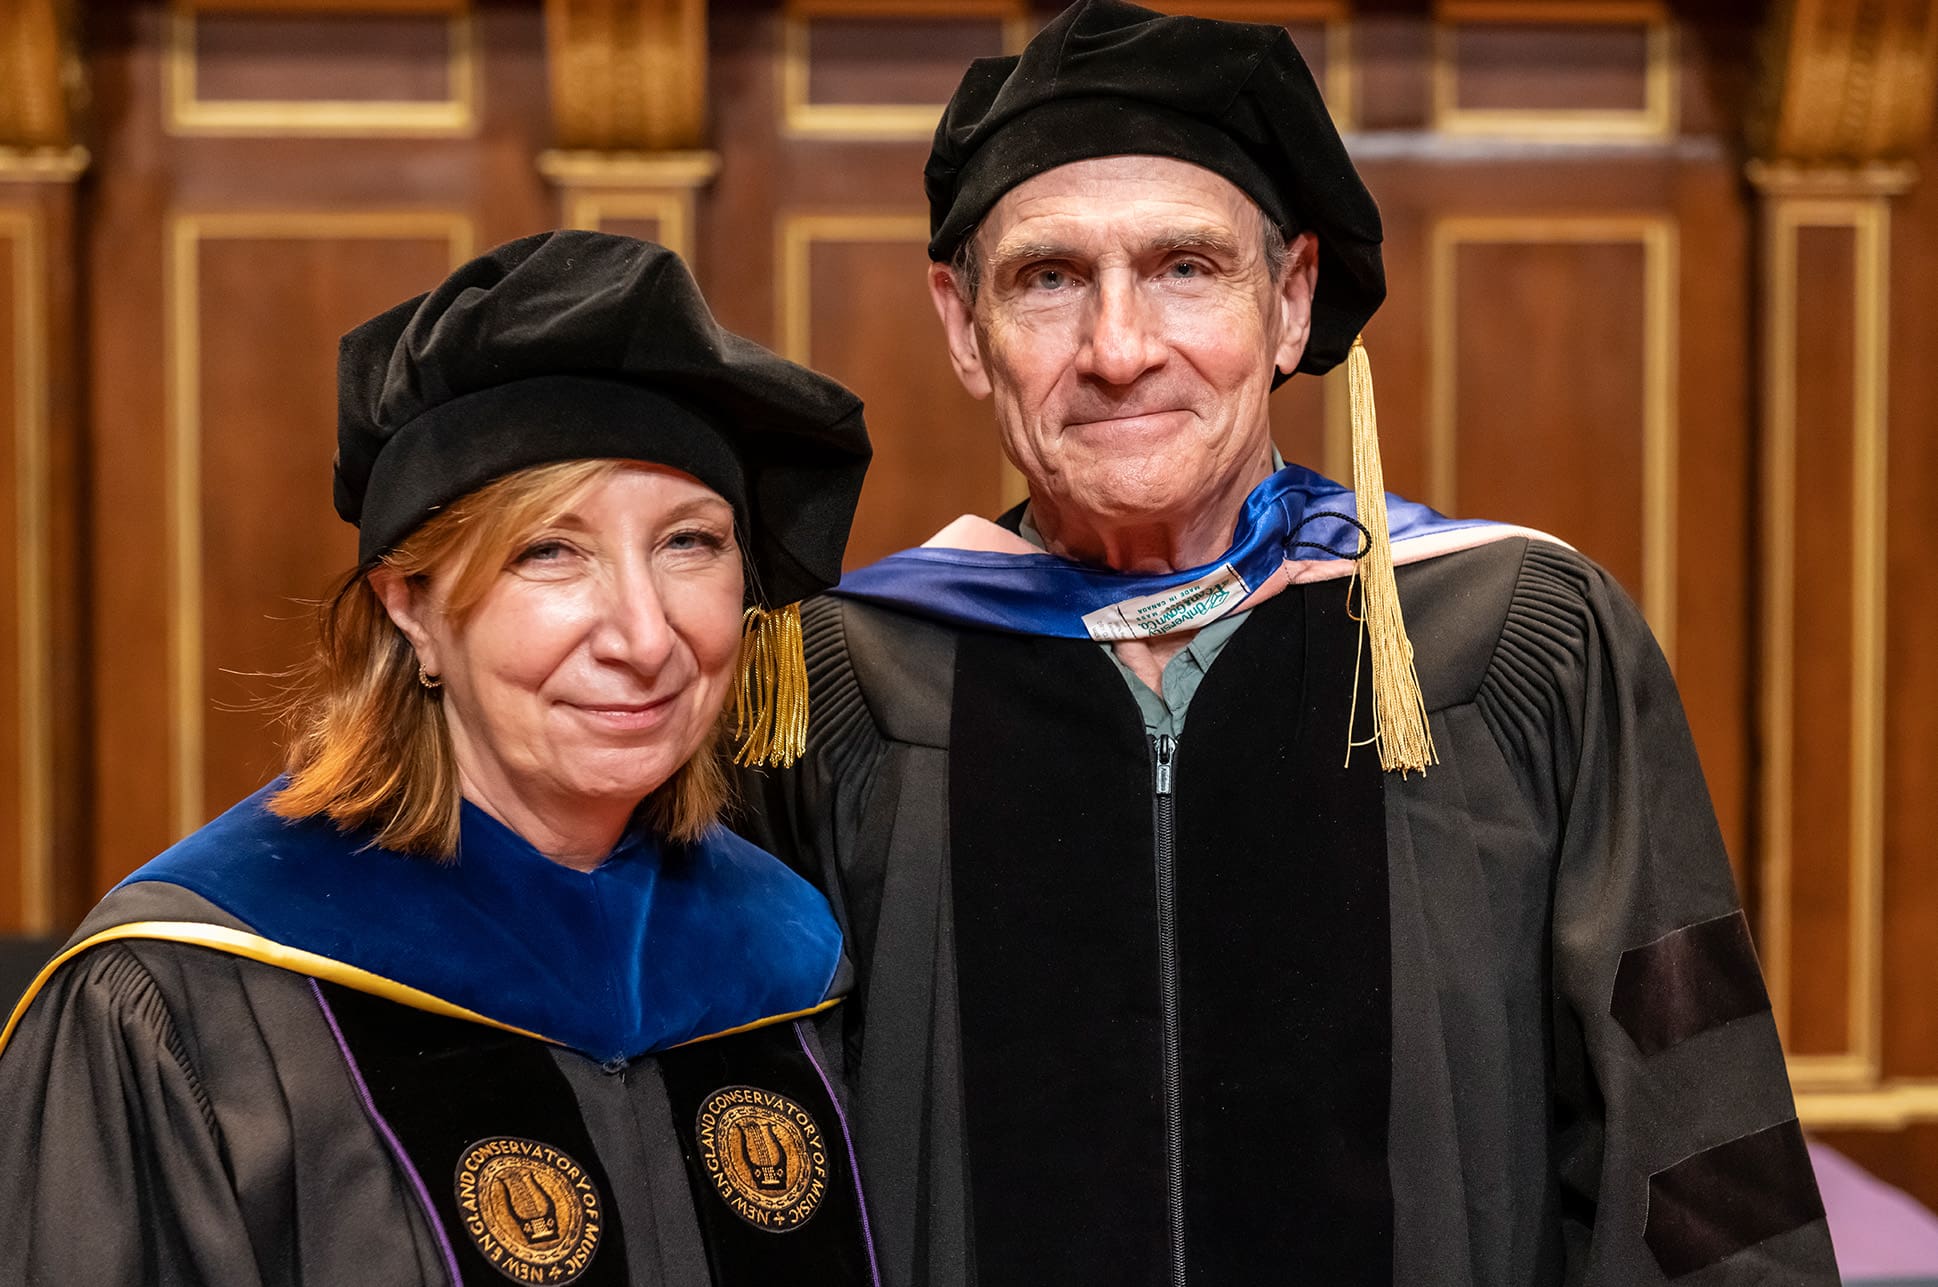 NEC President Andrea Kalyn with Honorary Doctorate recipient James Taylor.